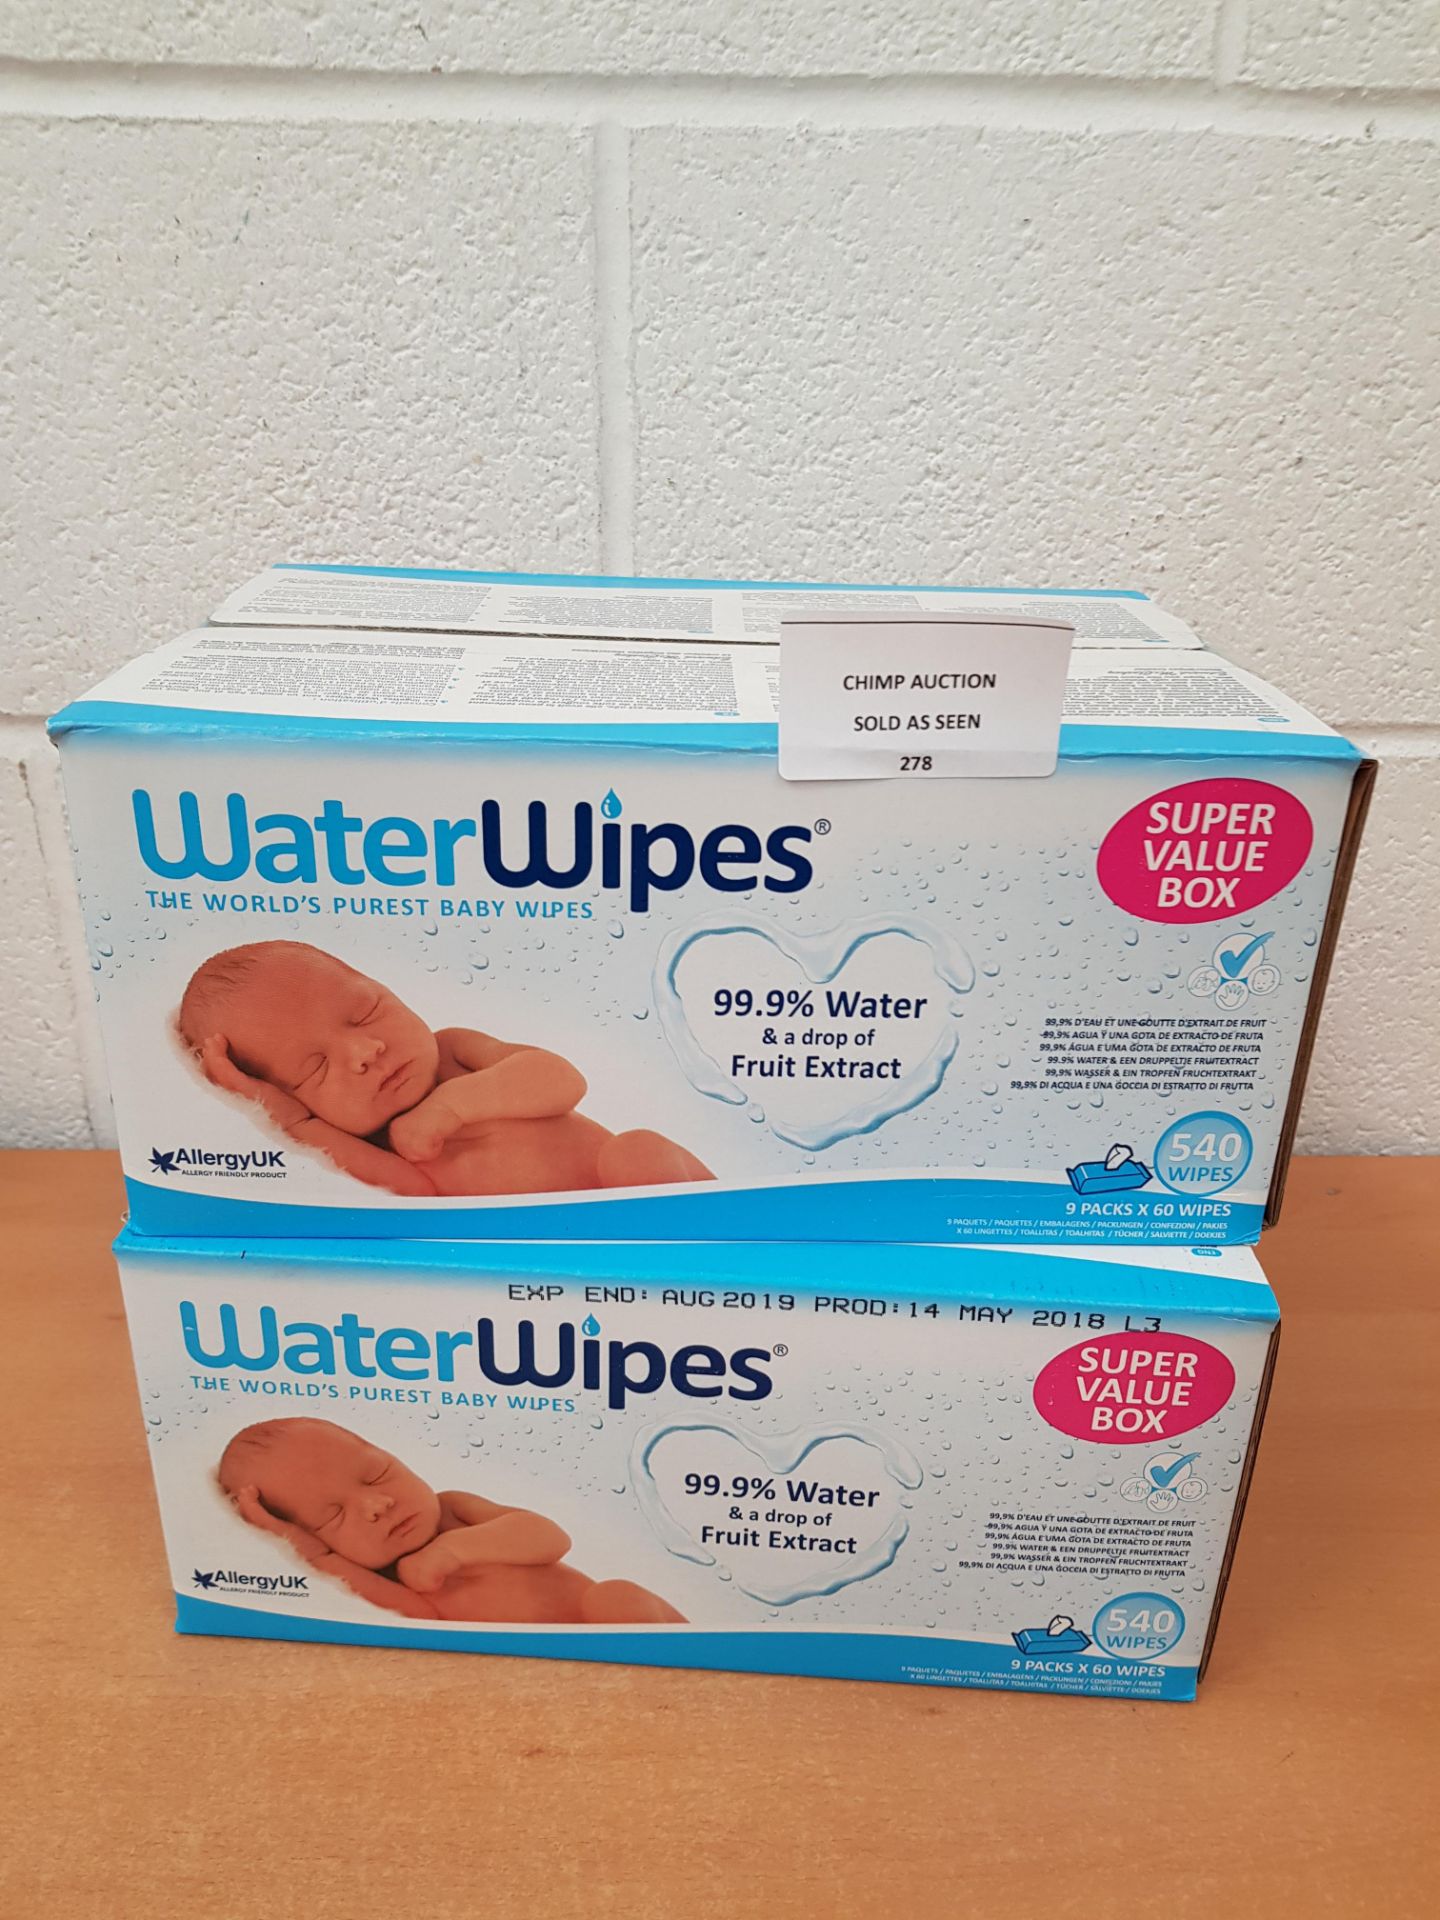 Brand new WaterWipes Baby Wipes Wipes (18 Packs / 1080 WIPES ) RRP £50.